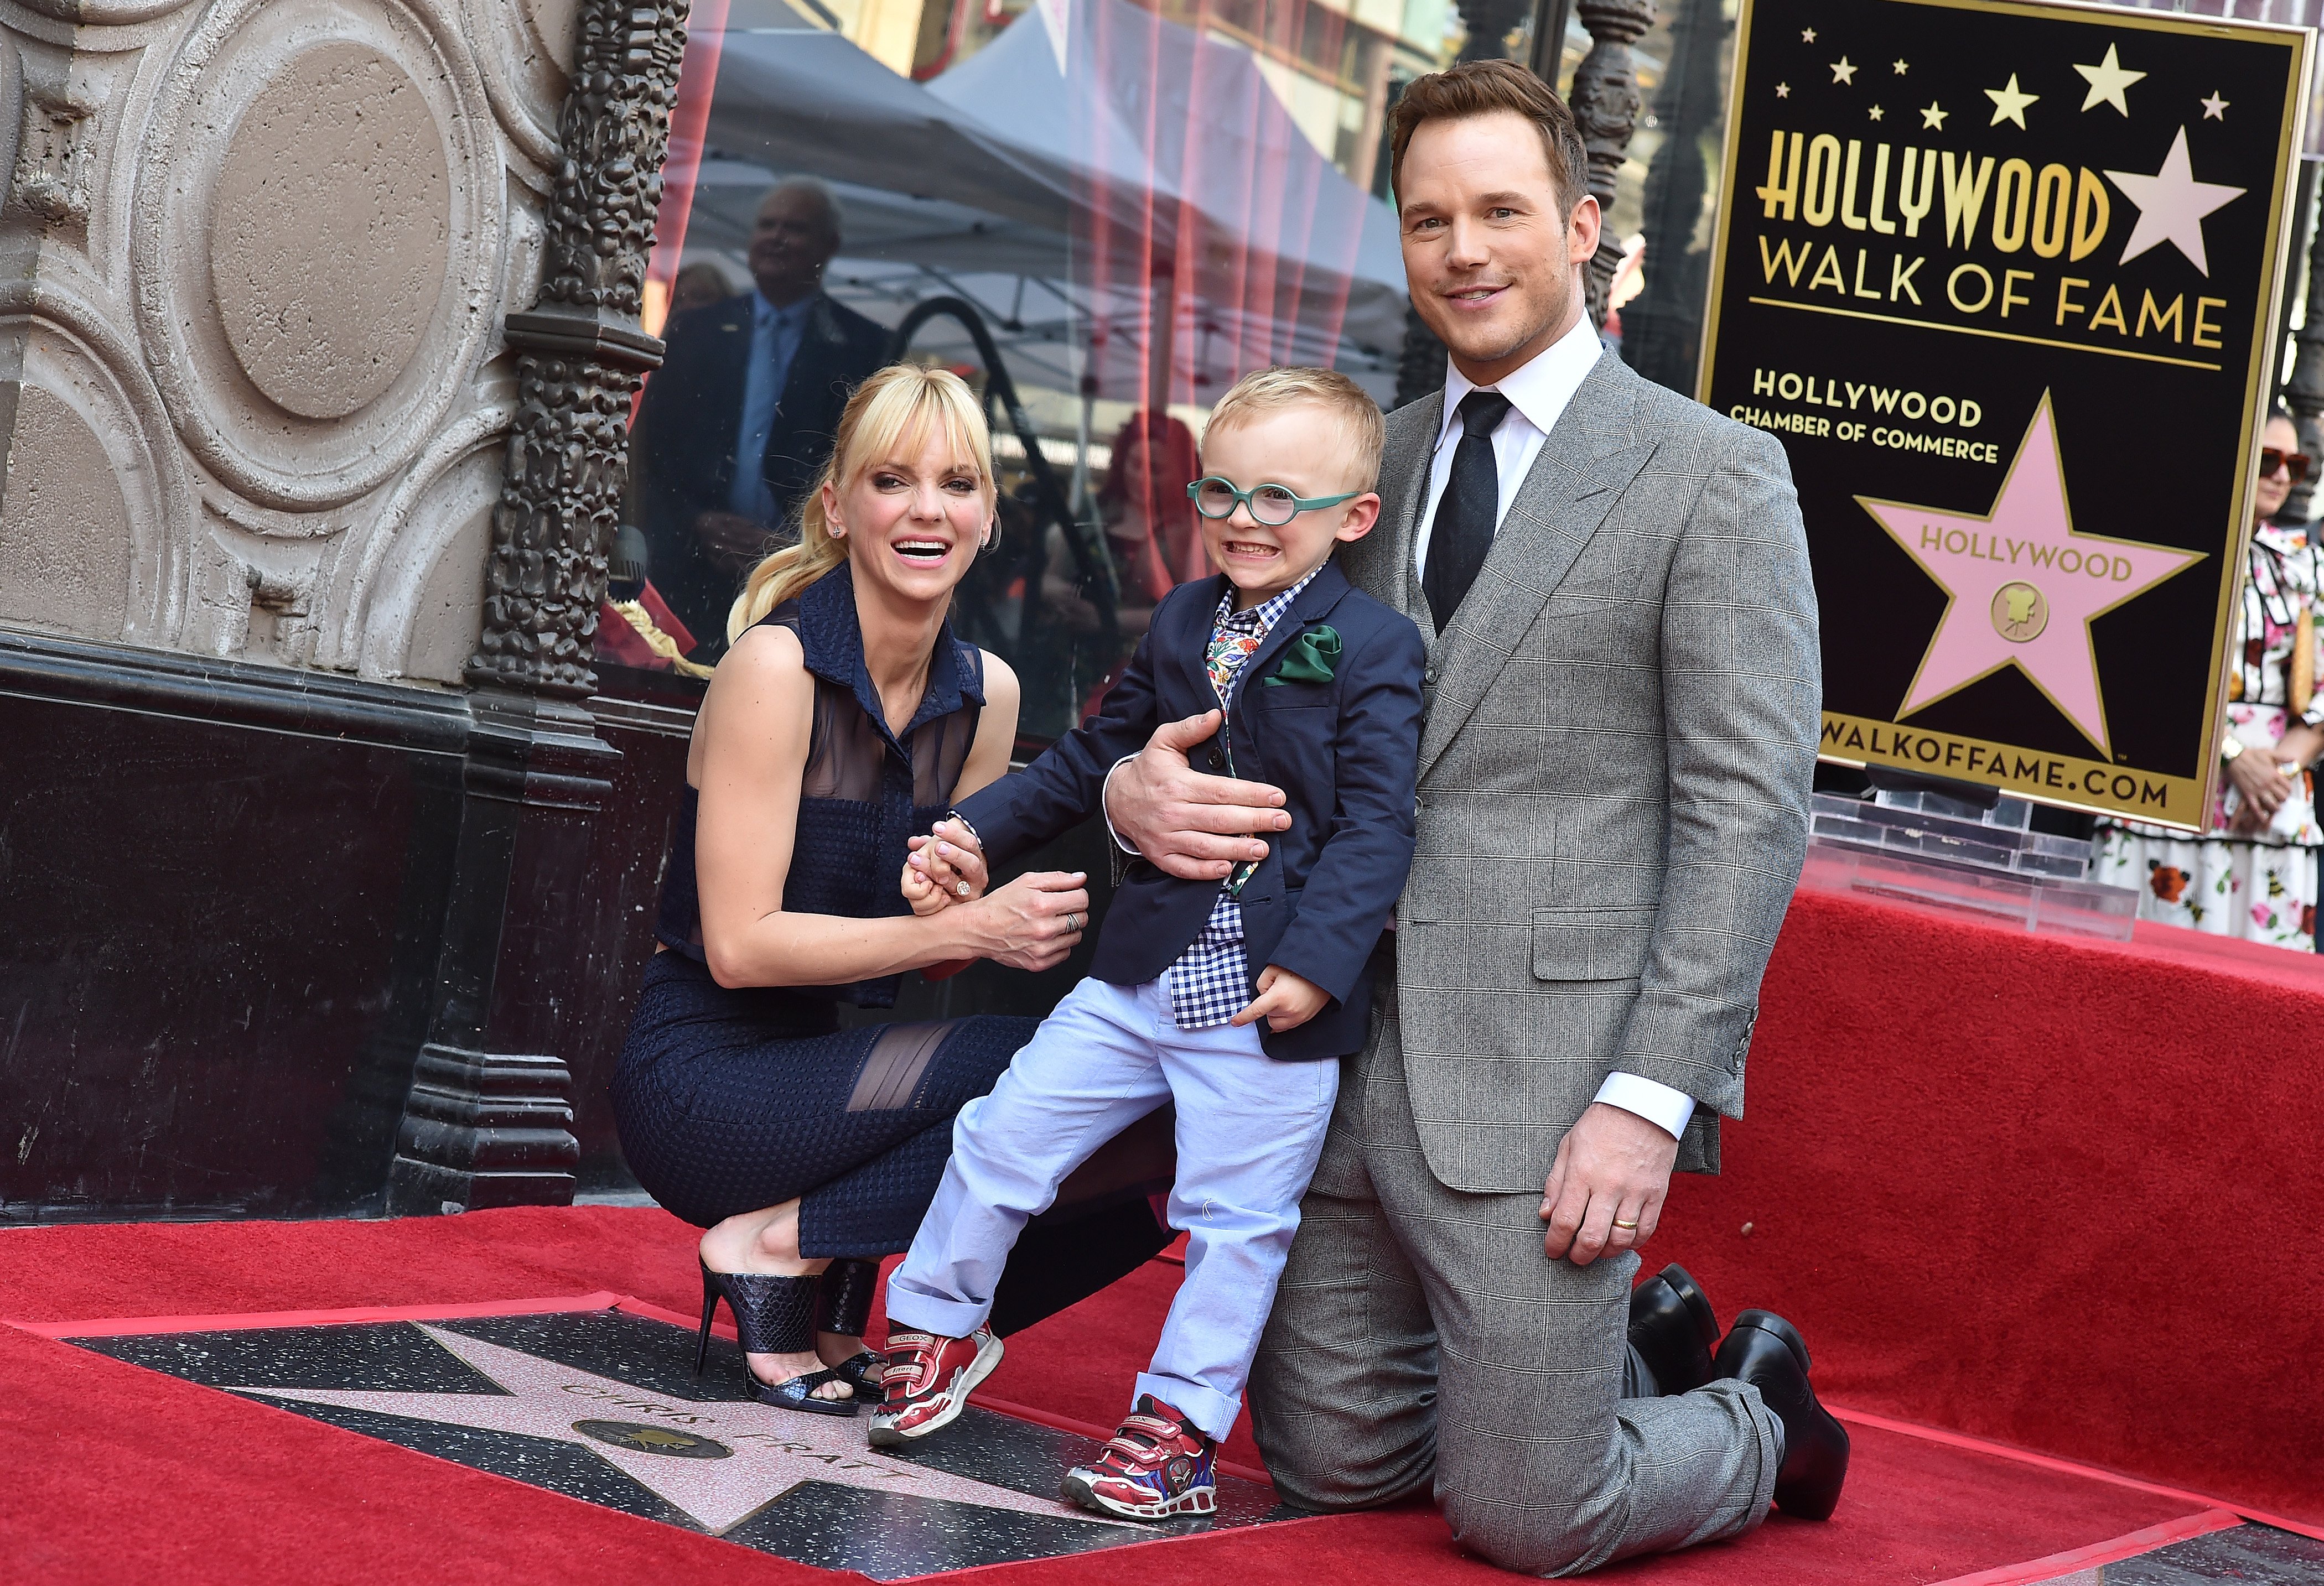 Chris Pratt, ex-wife Anna Faris and son Jack Pratt attend the ceremony honoring Chris Pratt with a star on the Hollywood Walk of Fame on April 21, 2017 in Hollywood, California | Source: Getty Images 